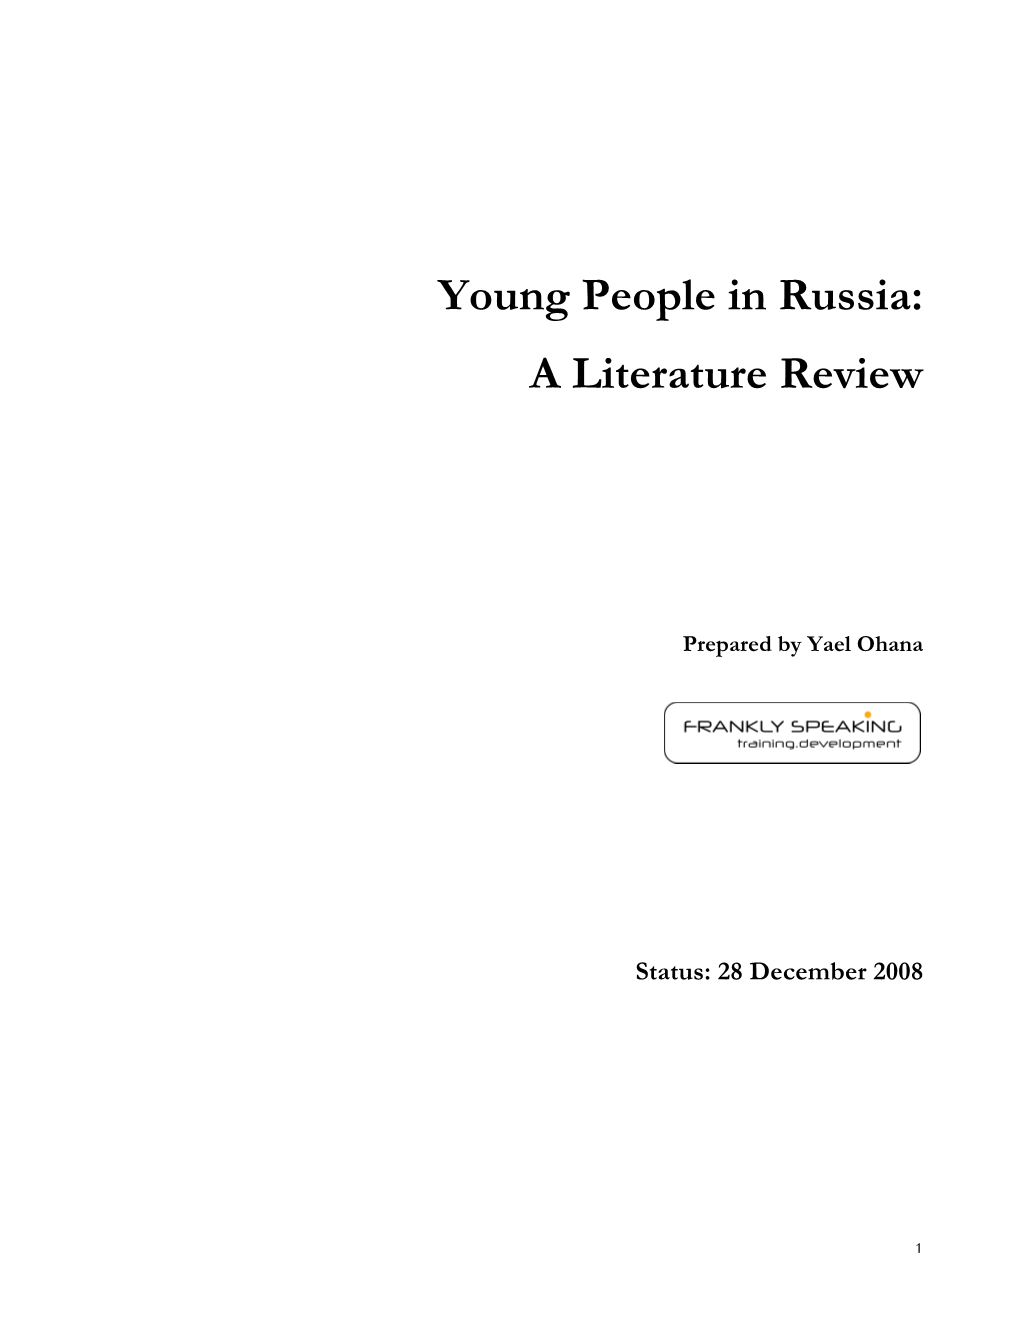 Young People in Russia: a Literature Review